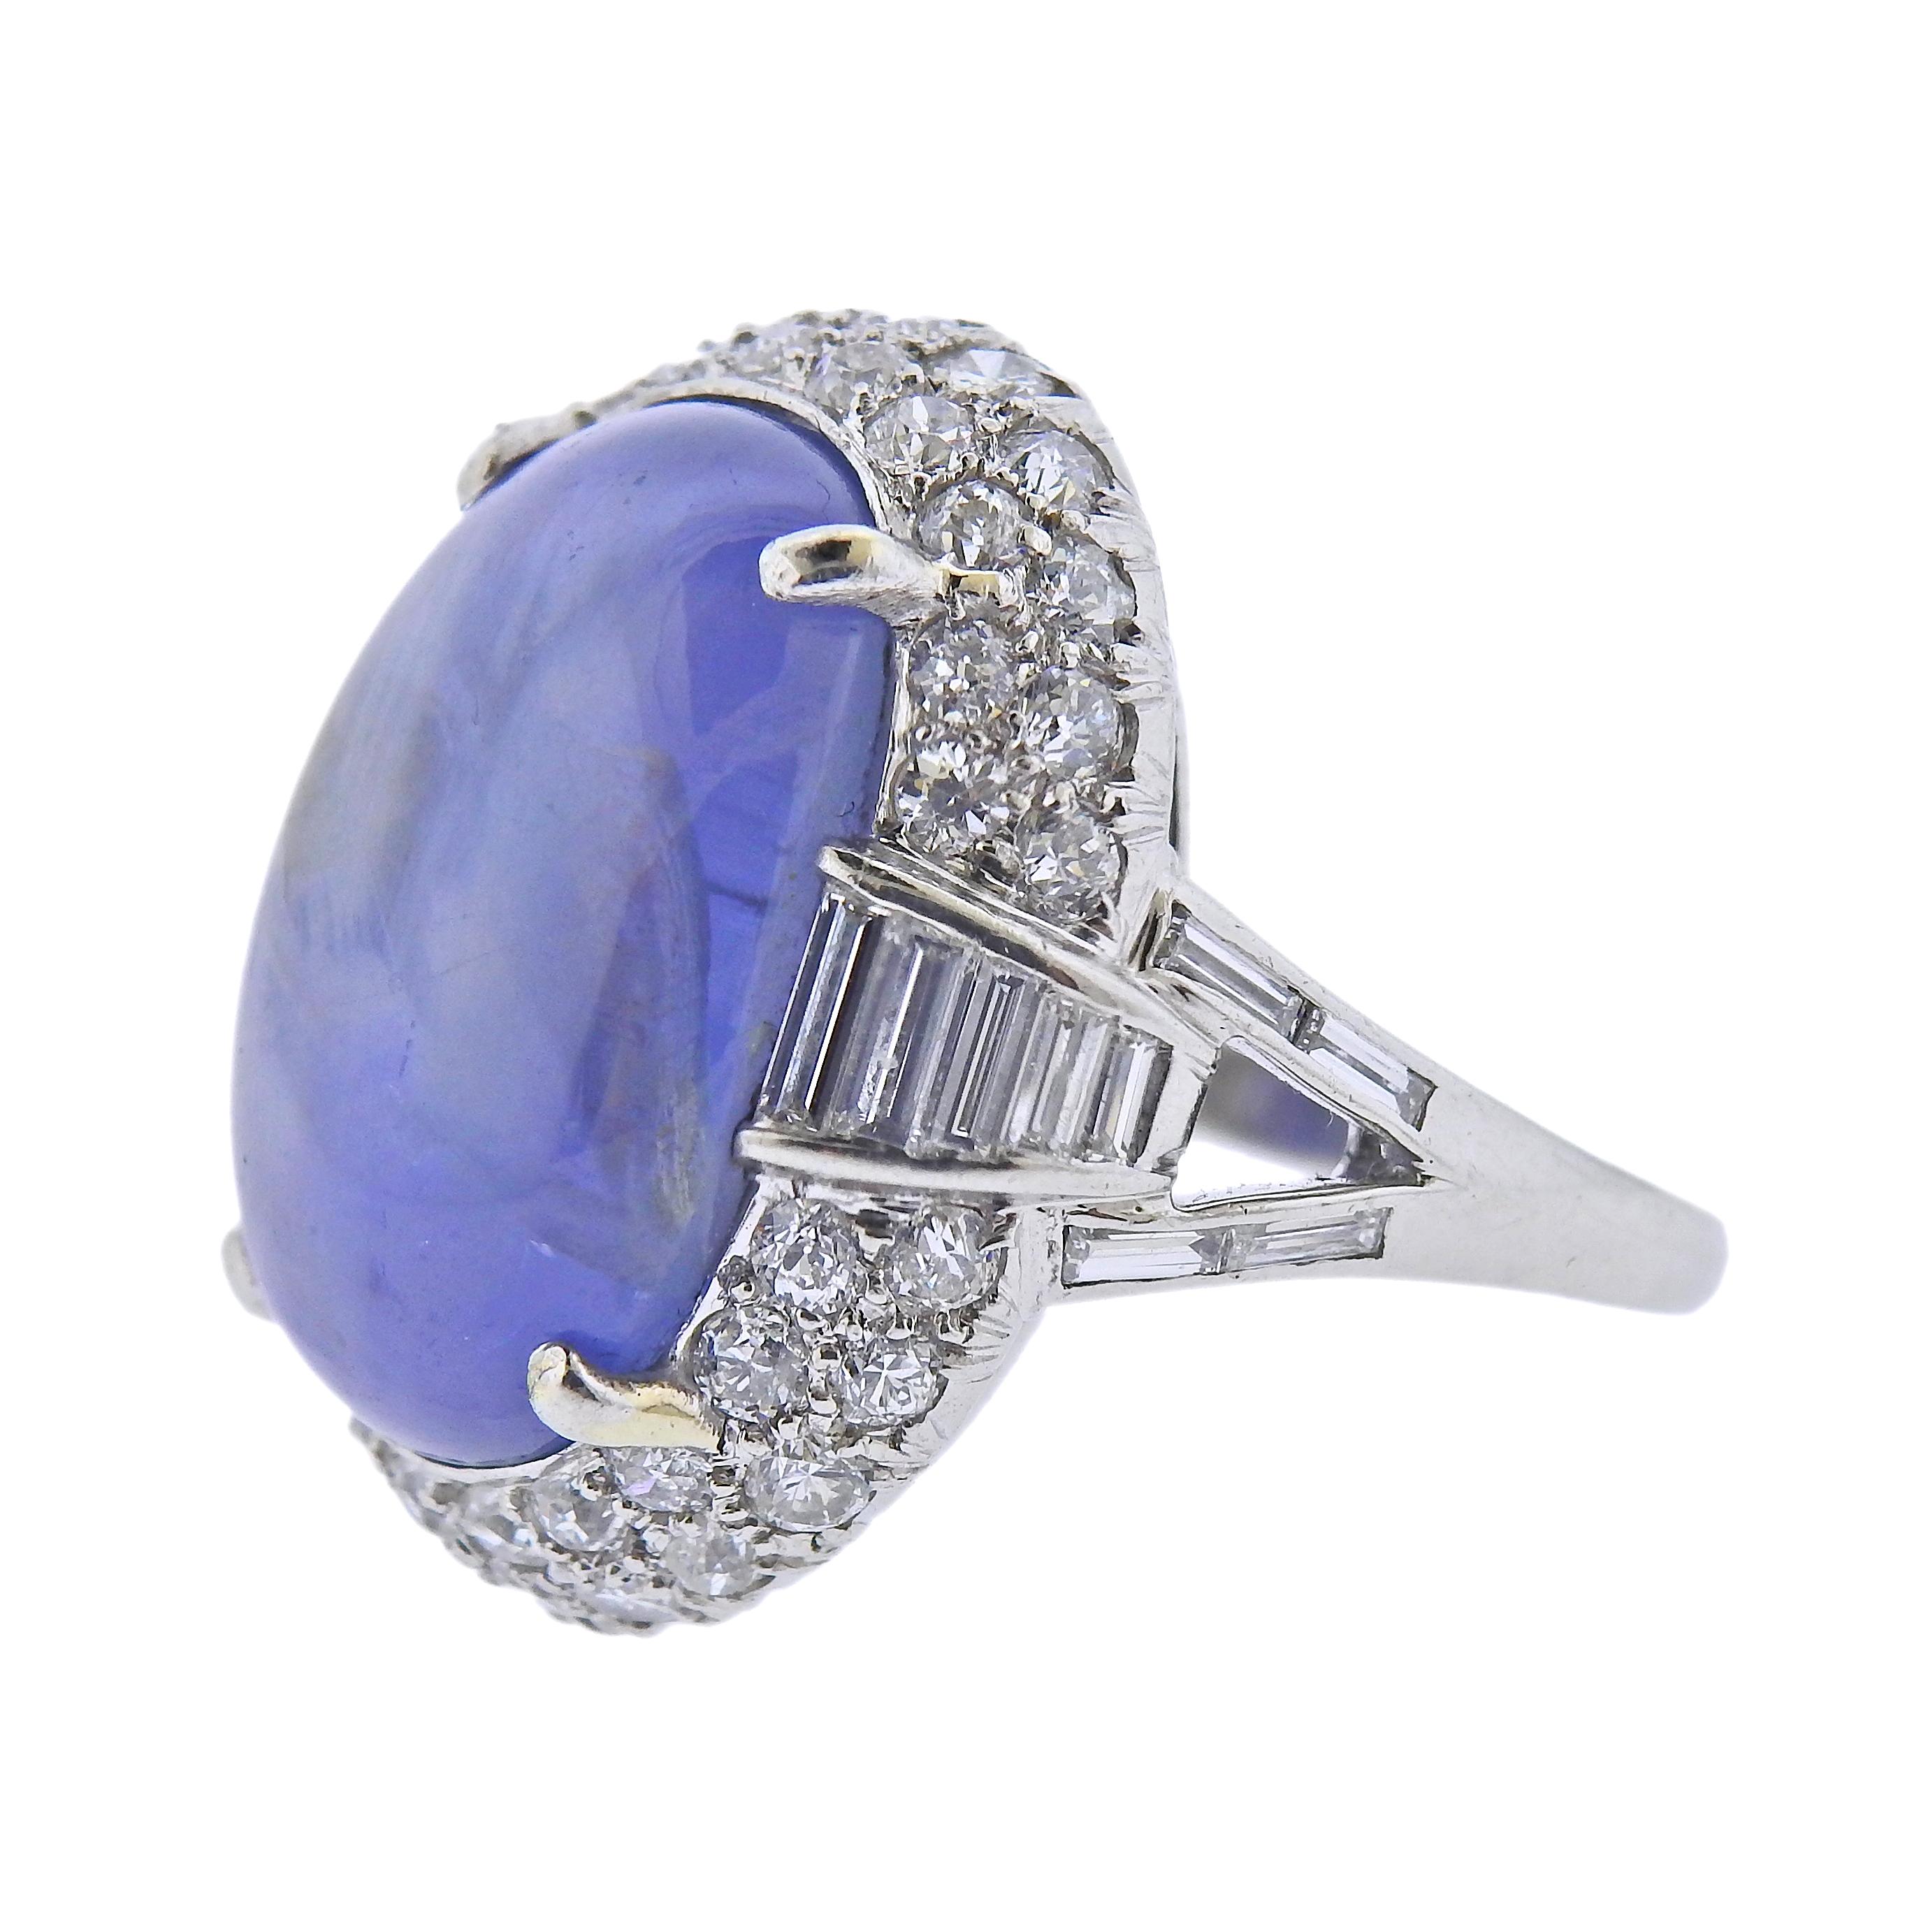 Platinum cocktail ring, featuring center 25-30cts star sapphire cabochon , measuring 20.6 x 14.7 x 9.5mm, surrounded with approx. 1.90ctw in diamonds. Ring size - 8.25, ring top - 25mm x 23mm. Weight - 20.6 grams. 